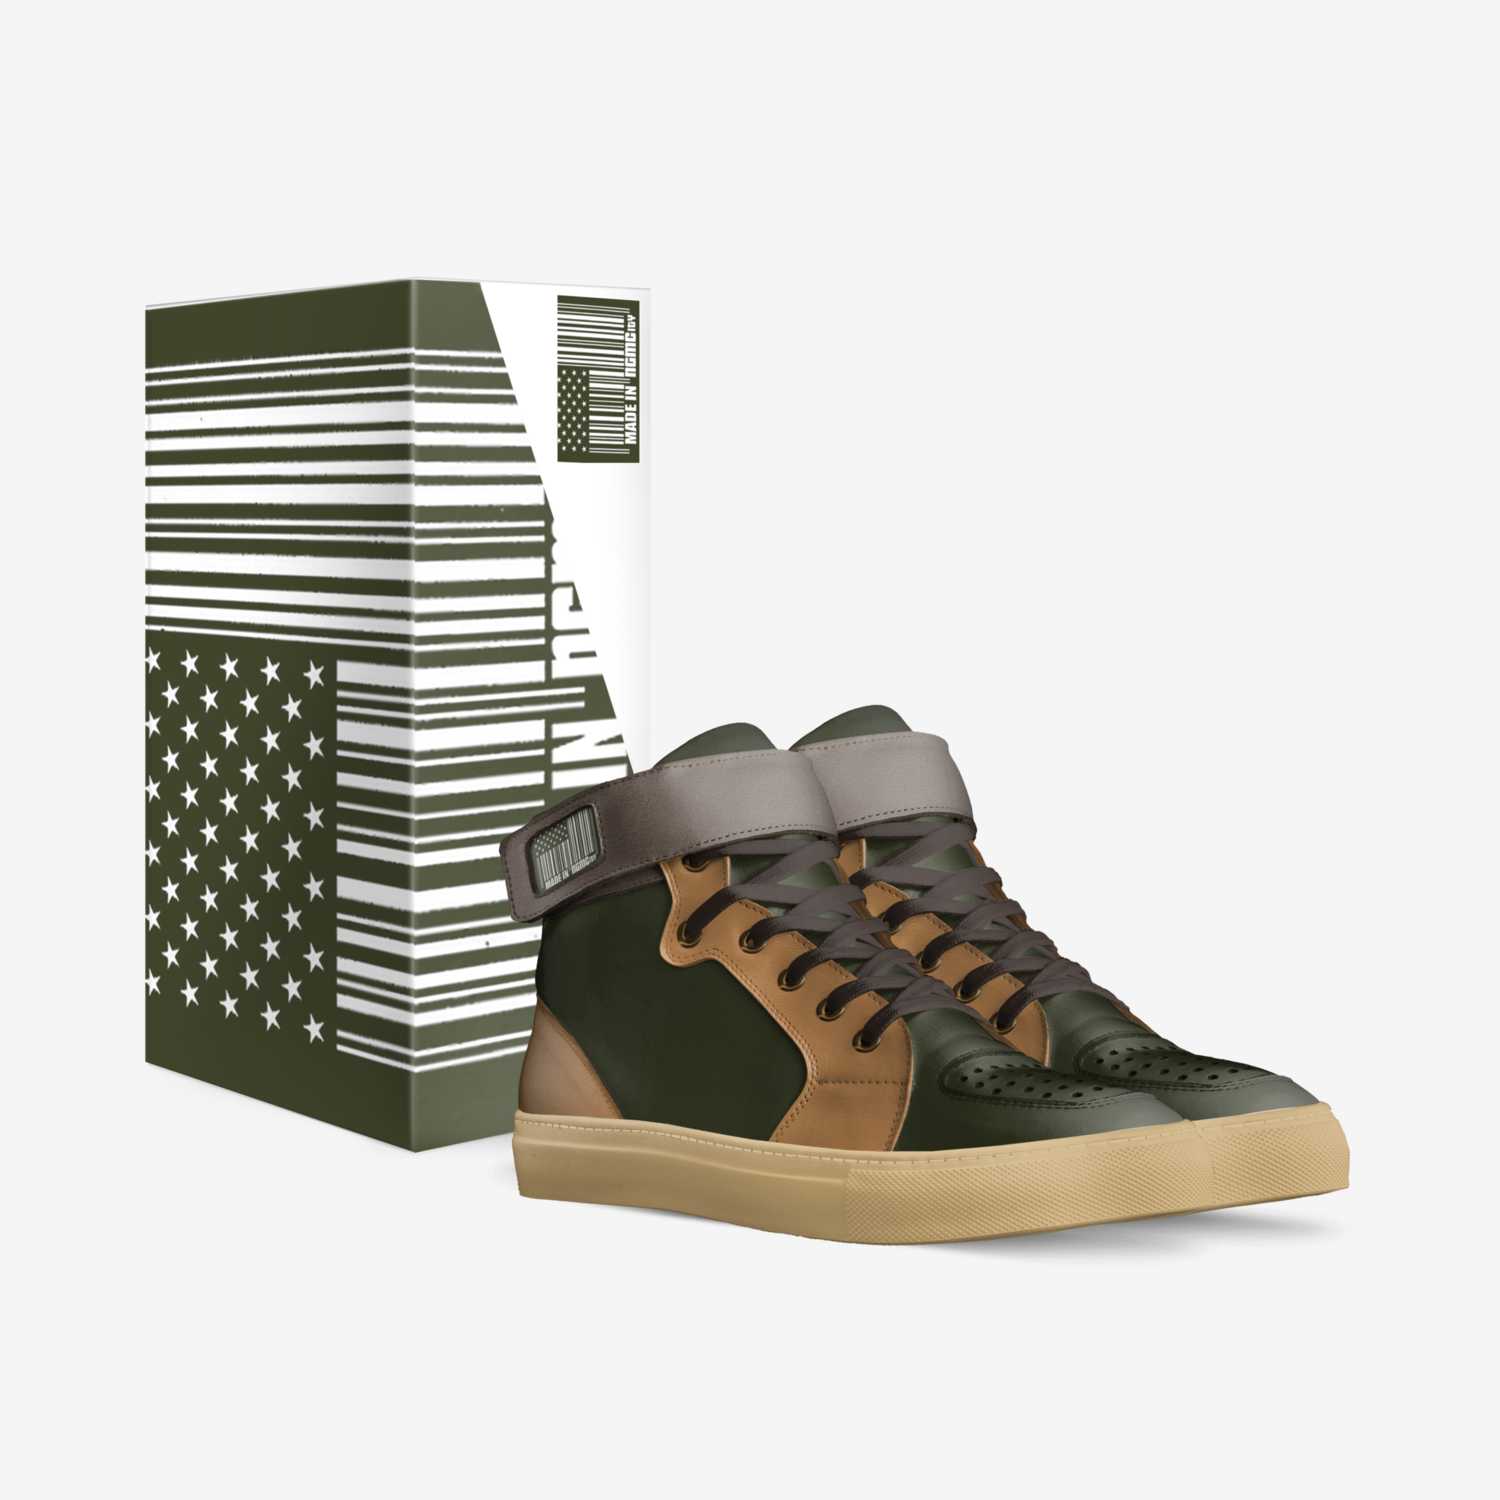 NGMC Broccoli & Beef custom made in Italy shoes by Damian Blount | Box view